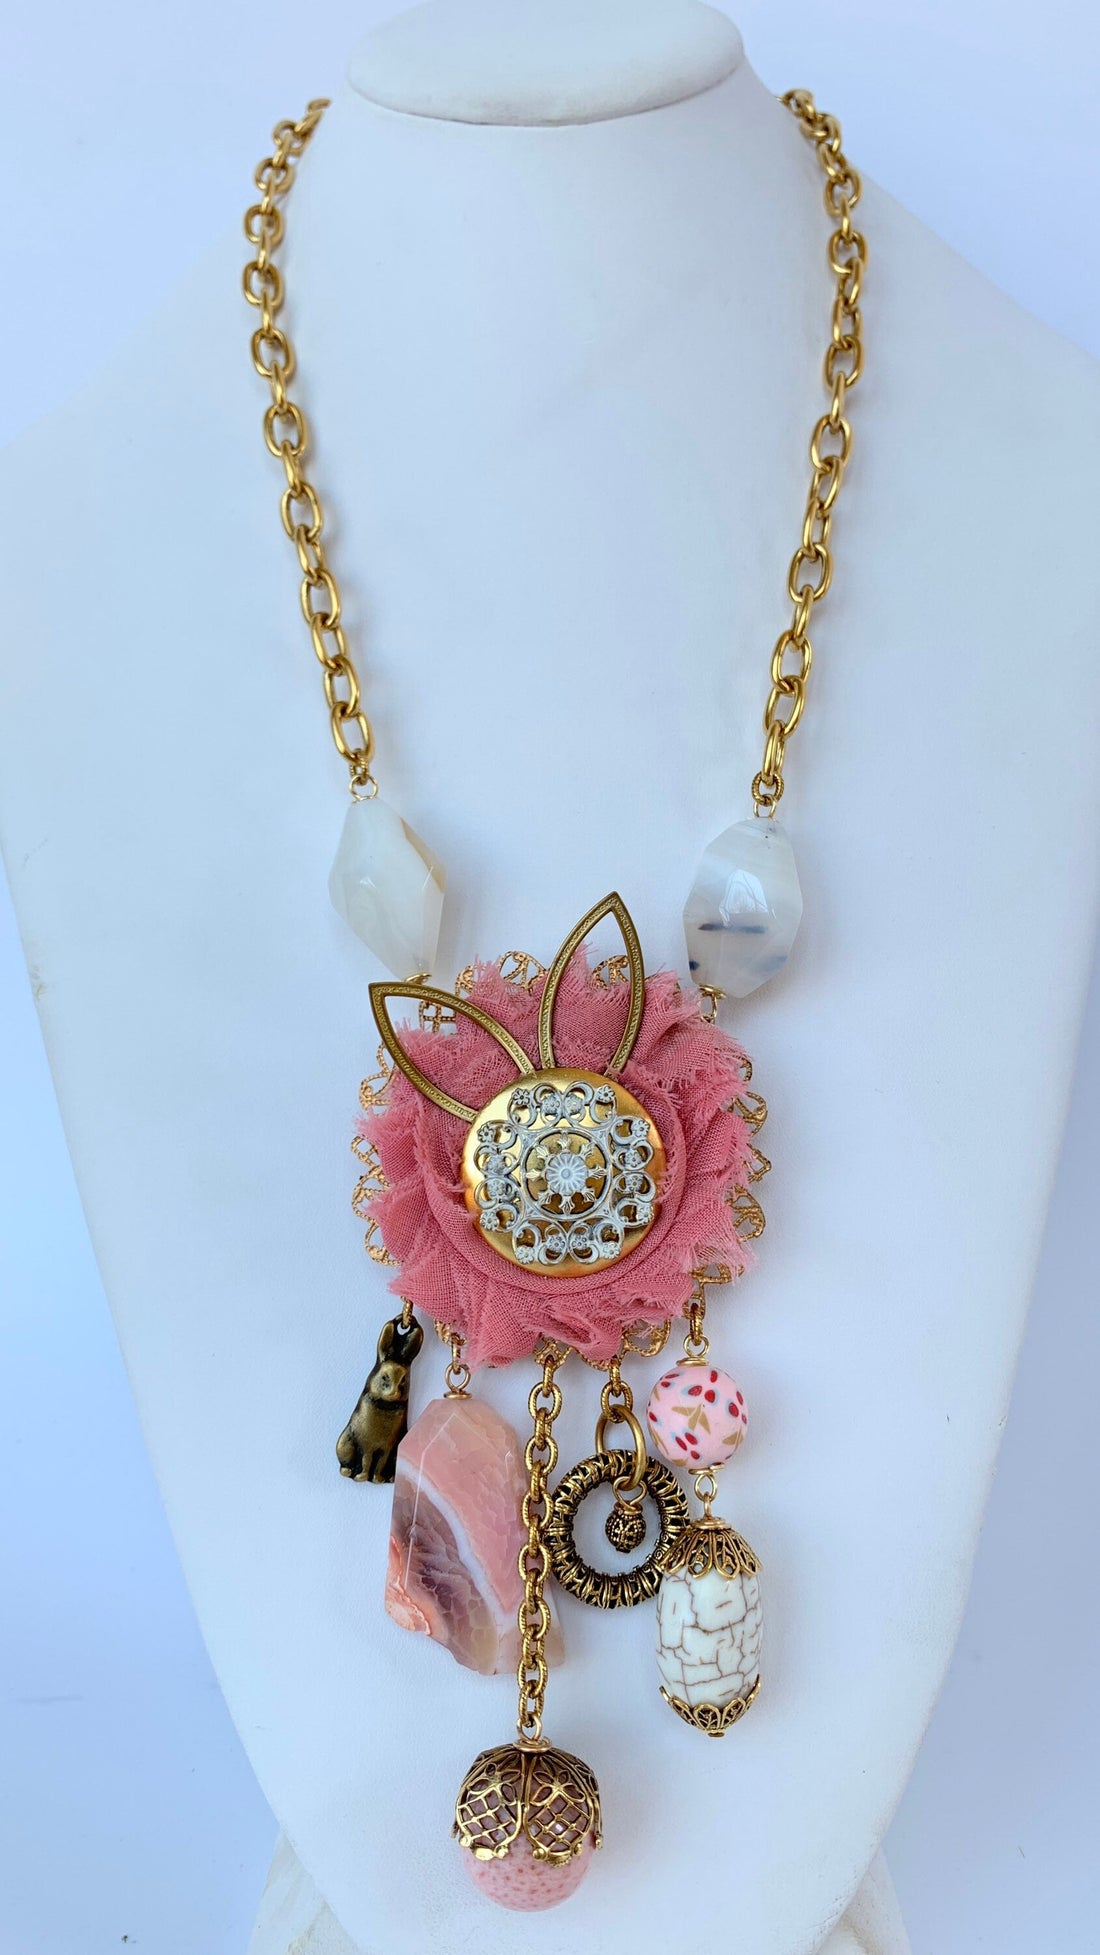 1928 Gold-Tone 16 Inch Link Statement Necklace, Color: Pink - JCPenney